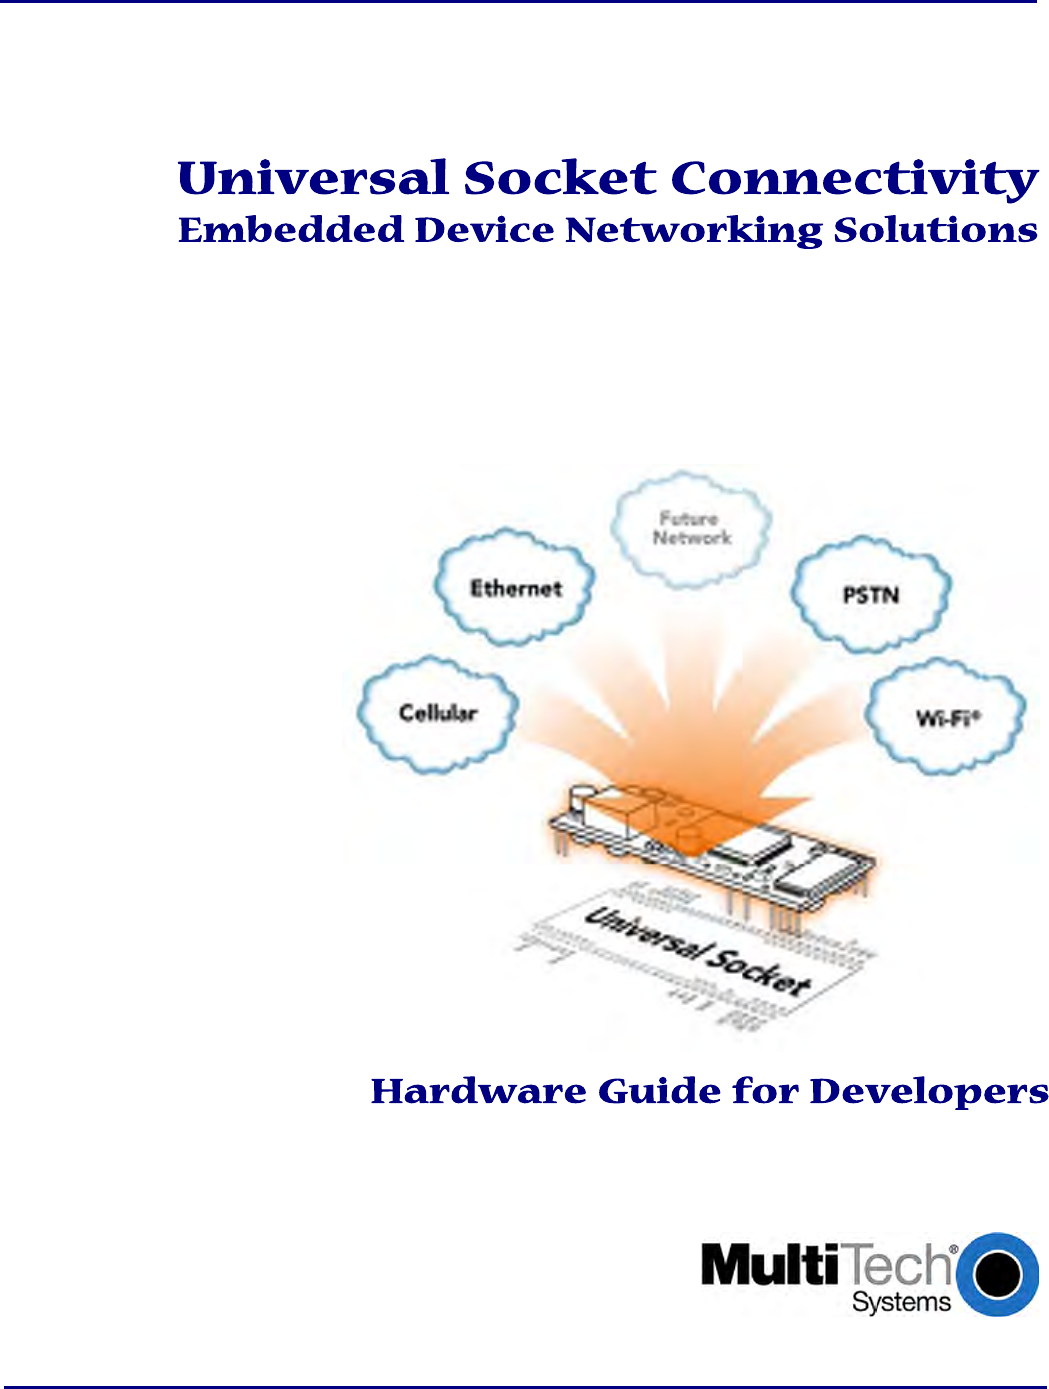             Universal Socket Connectivity  Embedded Device Networking Solutions           Hardware Guide for Developers       